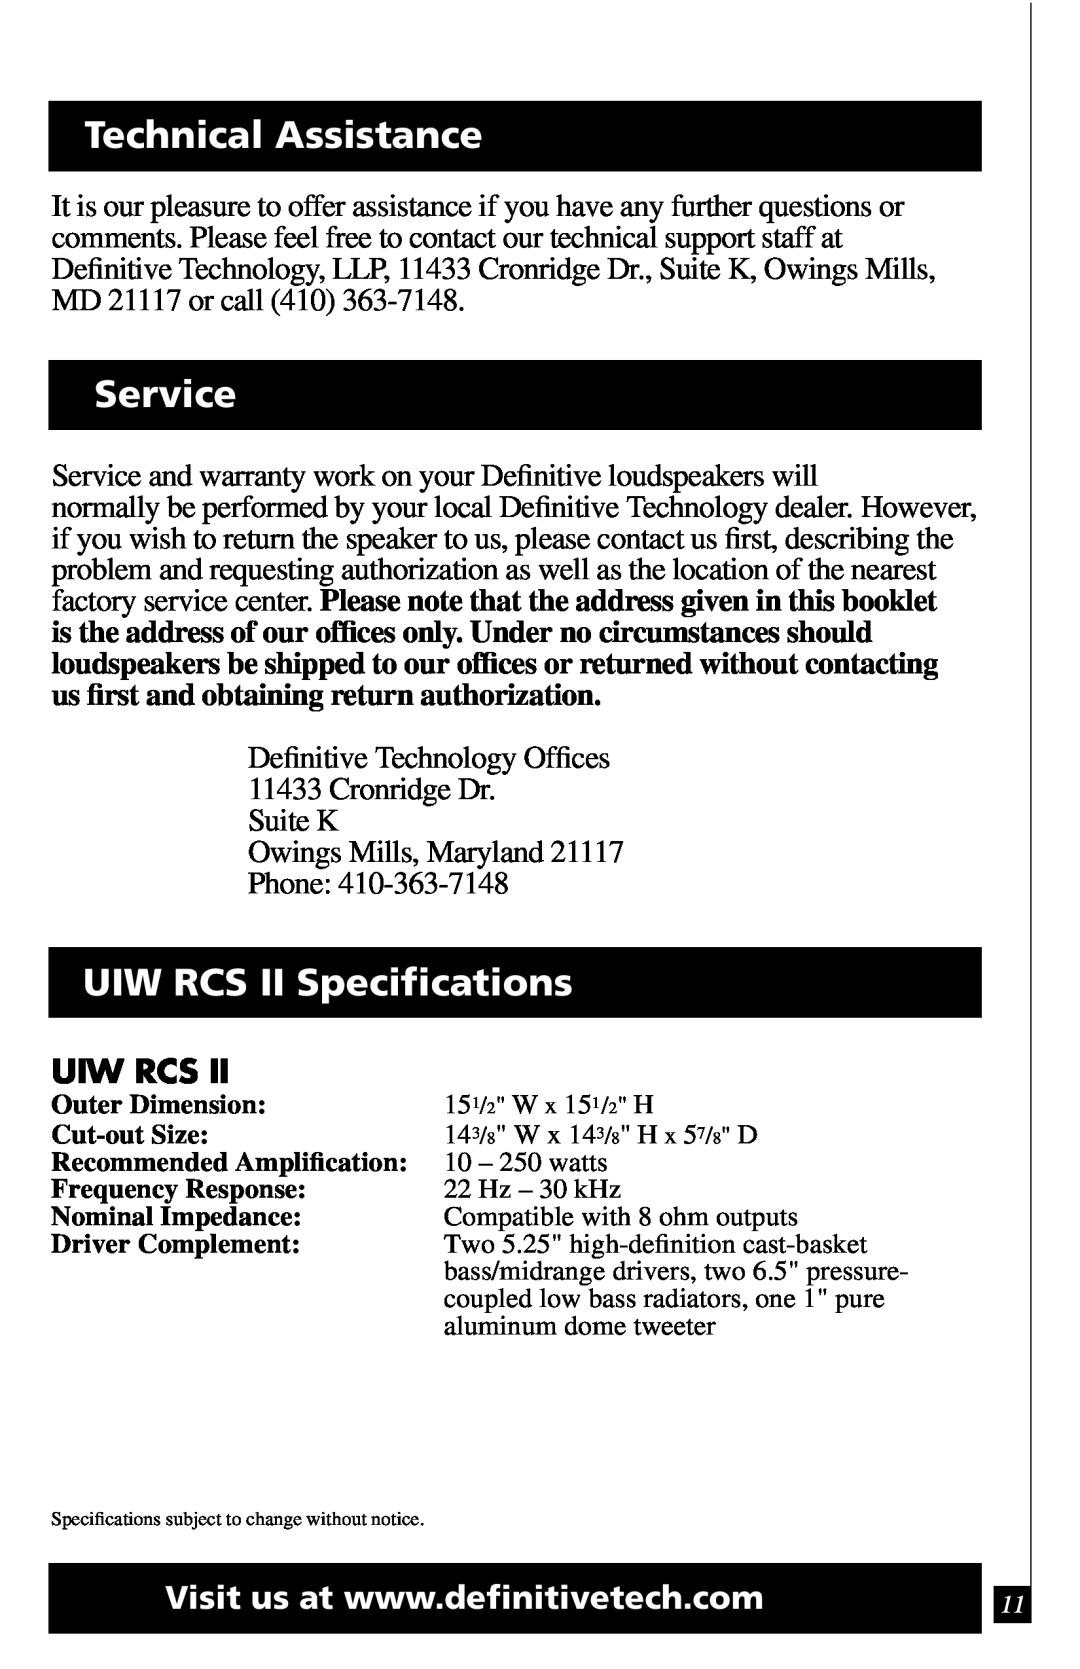 Definitive Technology owner manual Technical Assistance, Service, UIW RCS II Speciﬁcations, Uiw Rcs 